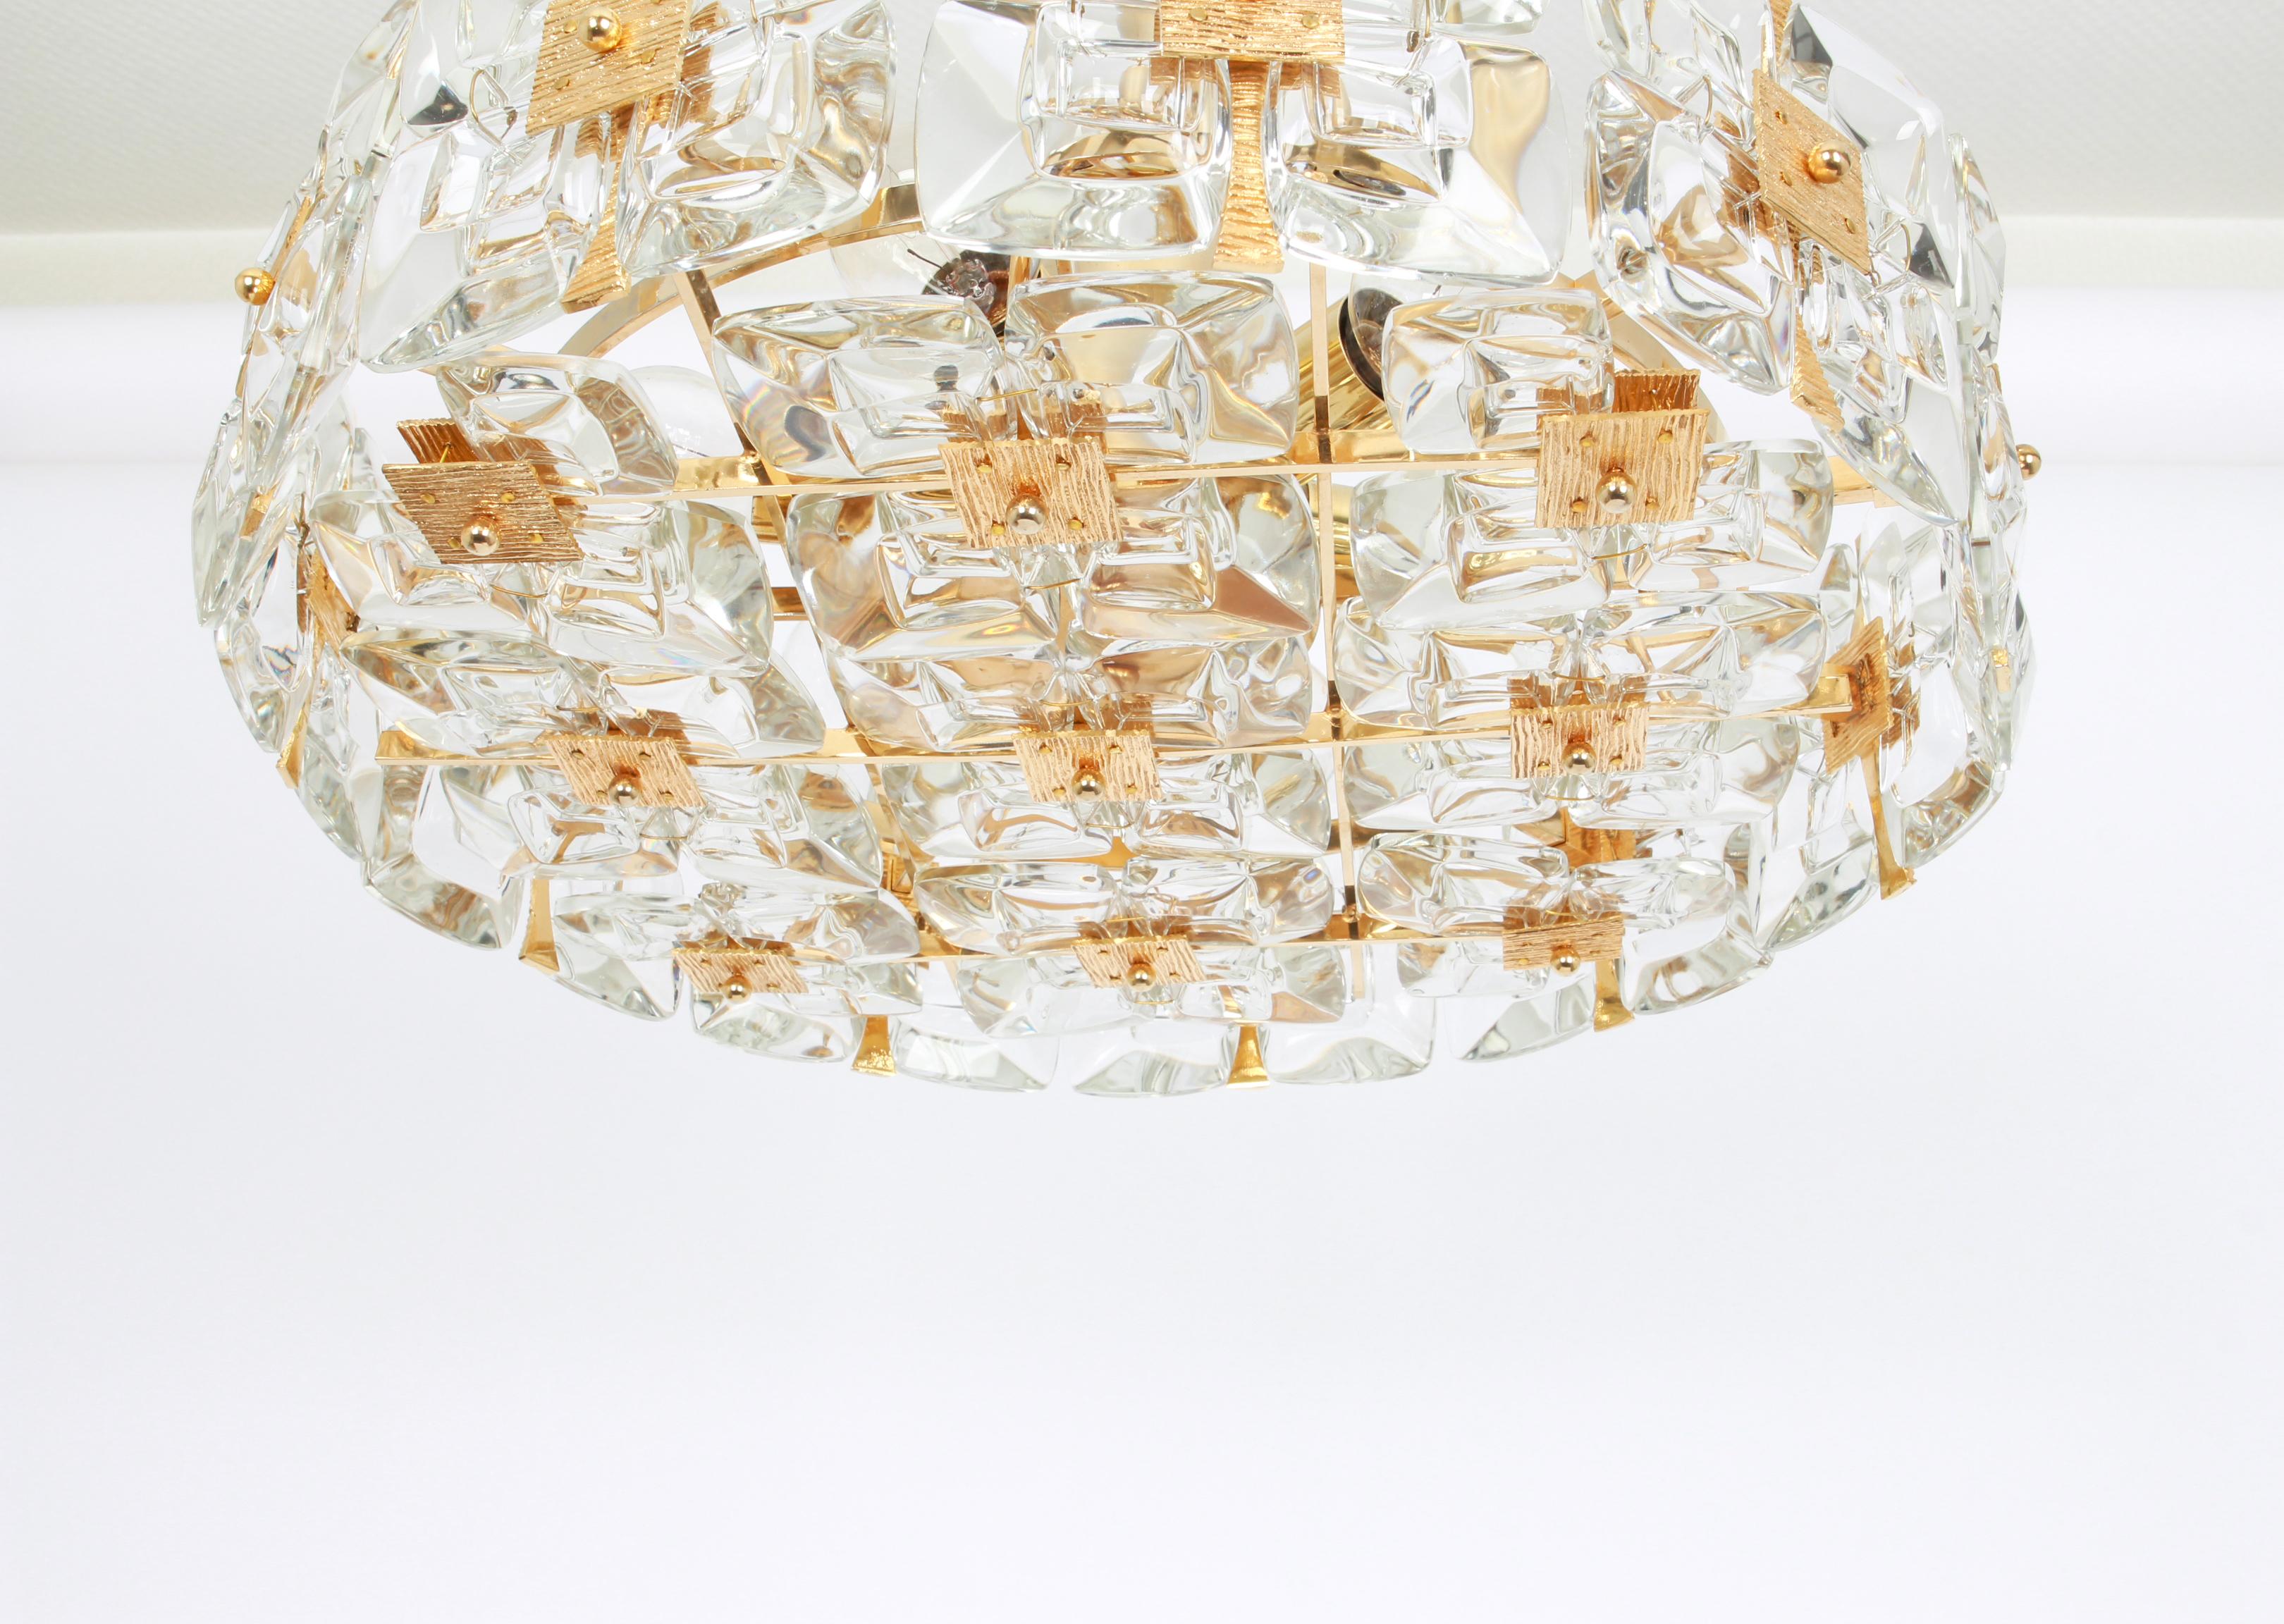 A wonderful and high quality gilded chandelier or pendant light fixture by Palwa -Design Sciolari, Germany, 1970s.

It is made of a 24 carat gold-plated brass frame decorated with individual 